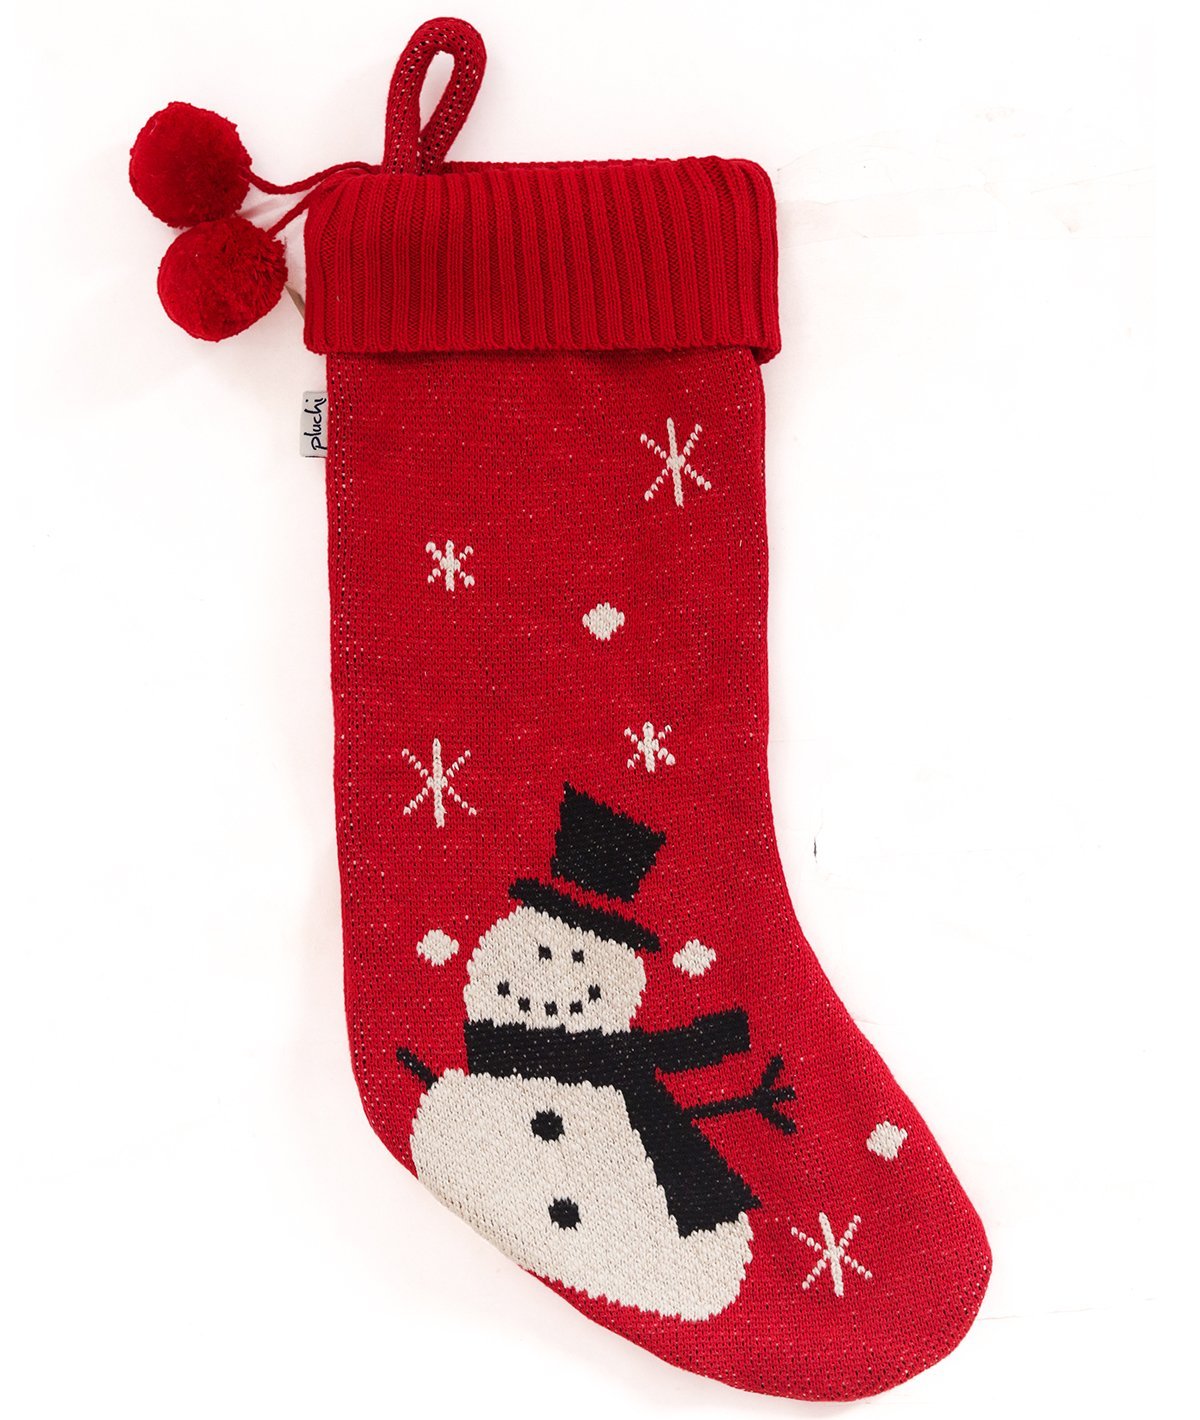 Snowman - Red & Black Cotton Knitted Christmas Decorative Stocking